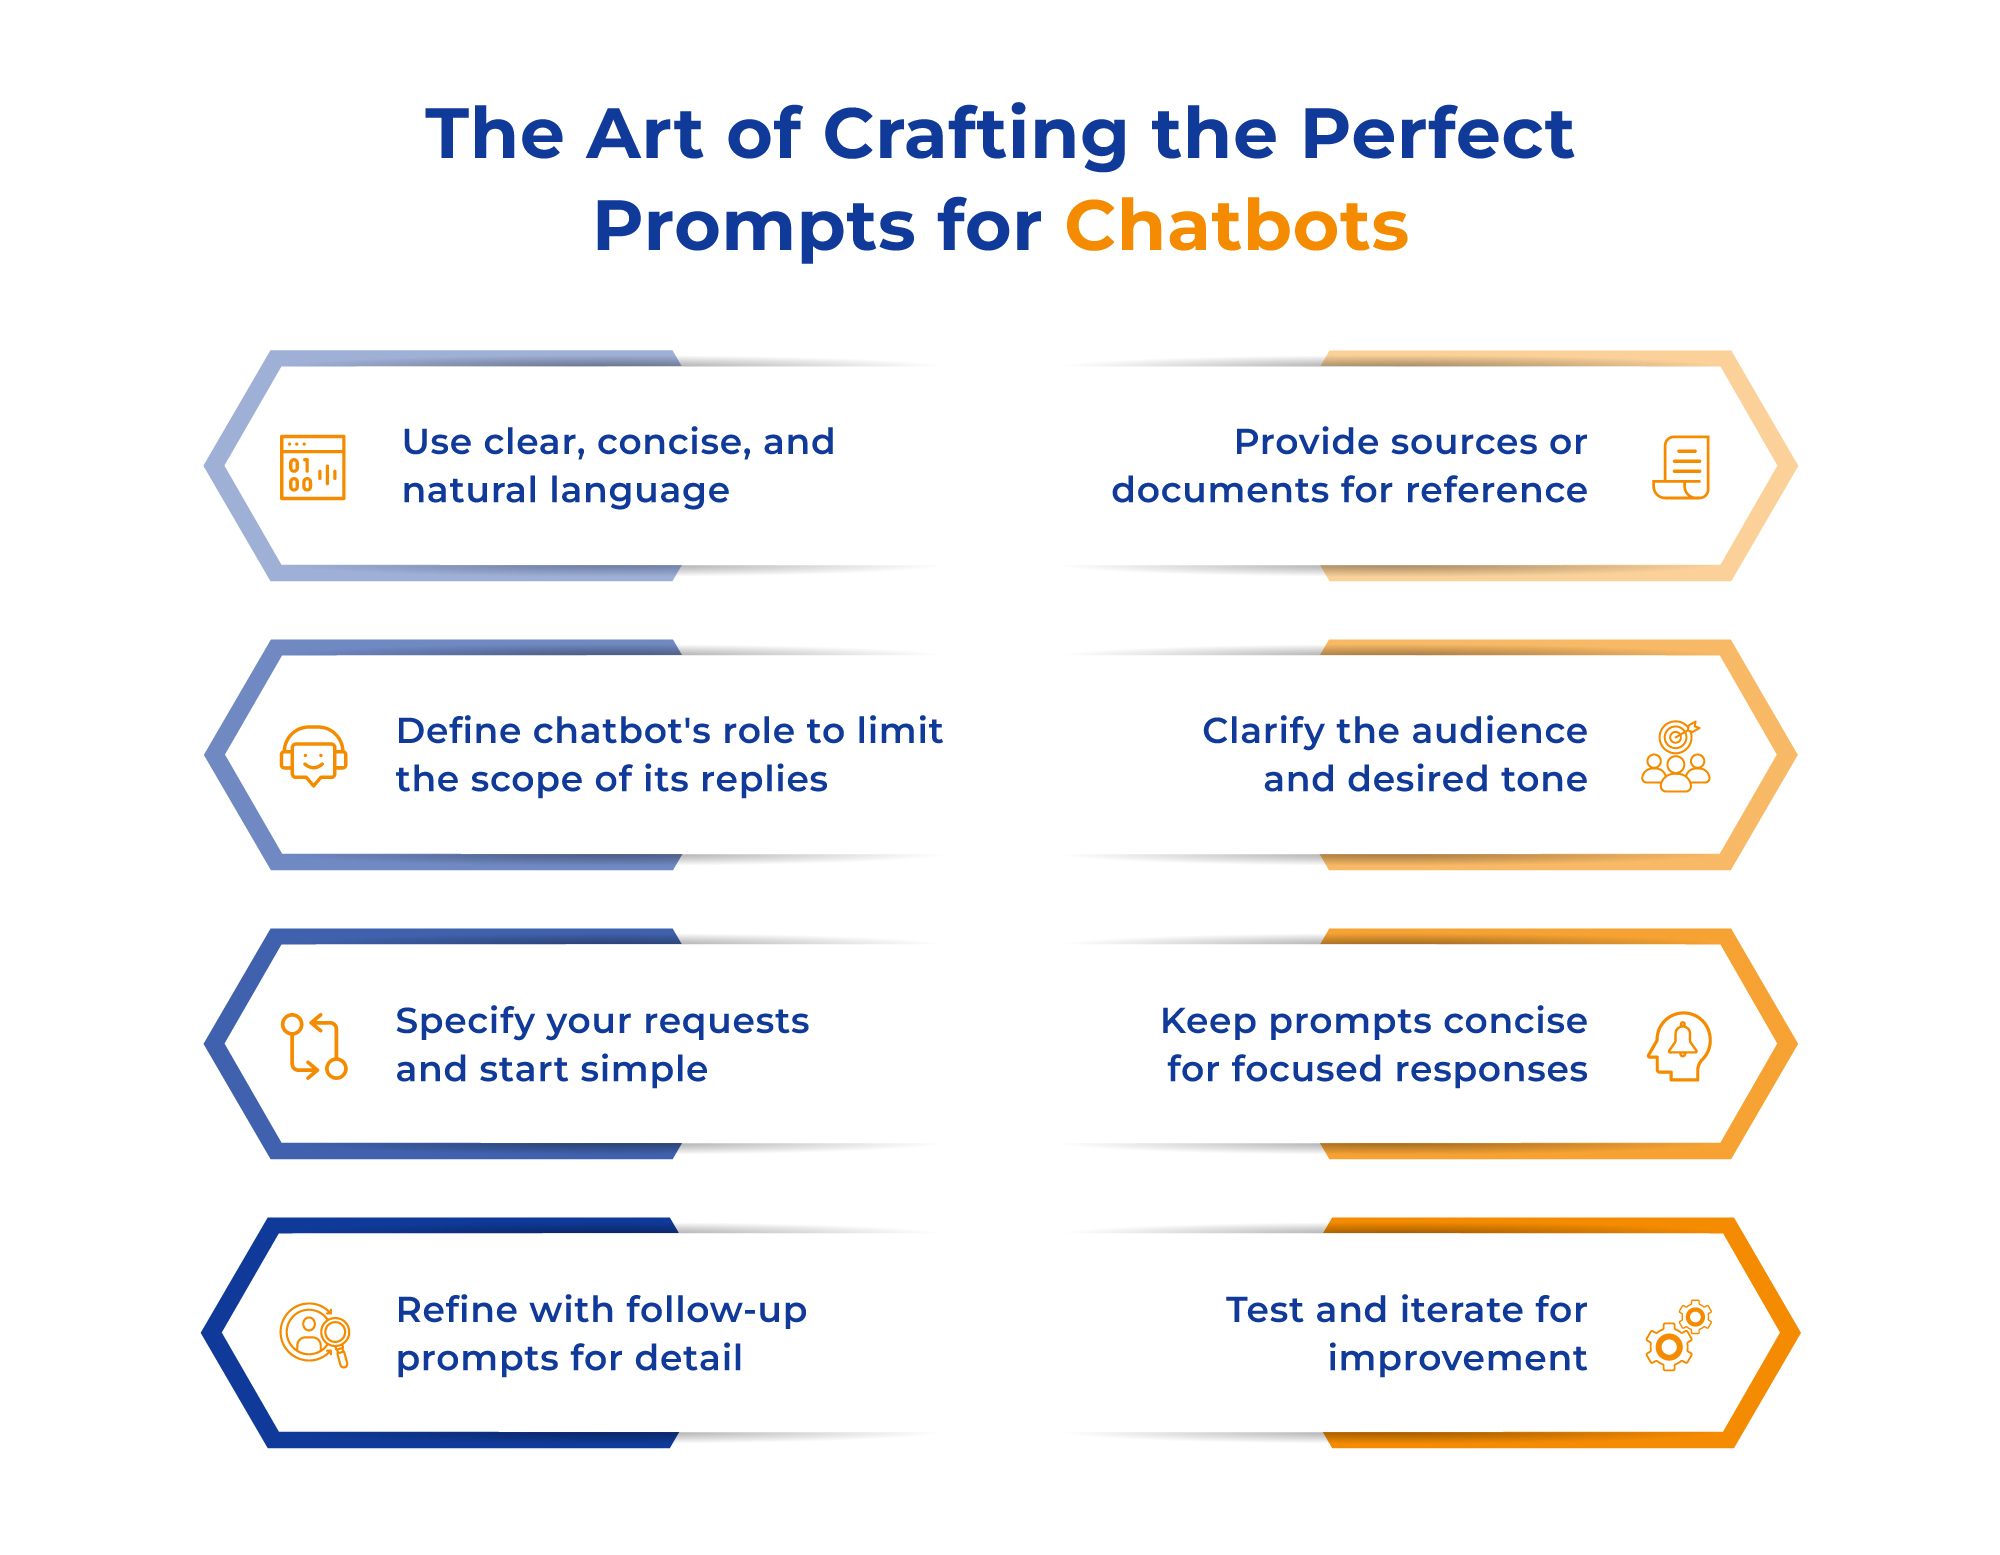 The Art of Crafting the Perfect Prompts for Chatbots